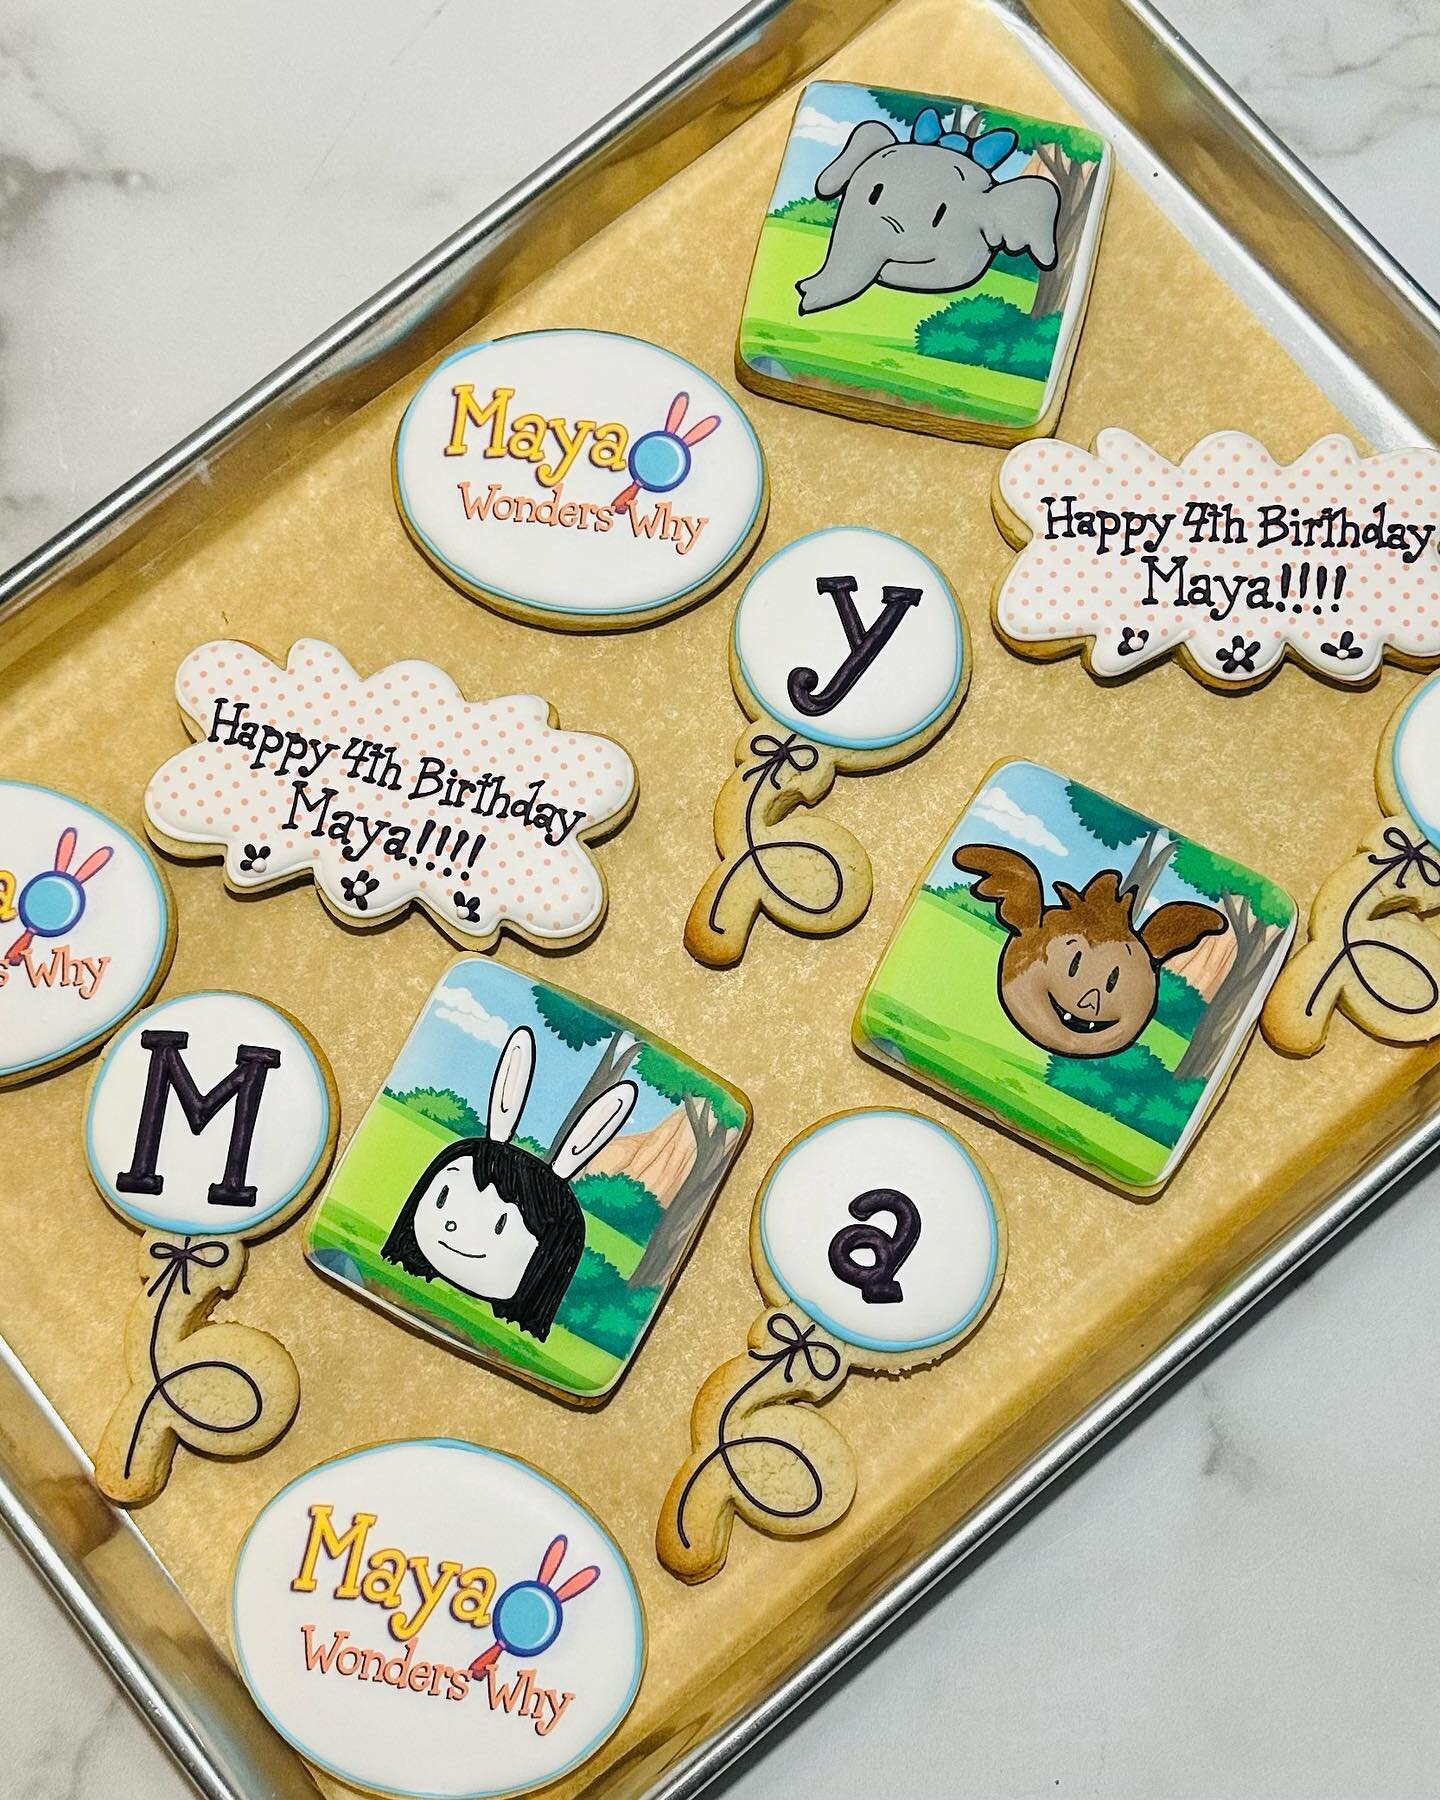 I&rsquo;m fairly certain I&rsquo;m the first person to make cookies inspired by the PBS show &ldquo;Elinor Wonders Why.&rdquo; In this set, I show off my graphic design skills by making a custom logo plaque cookie for the birthday girl. #SugarCookies